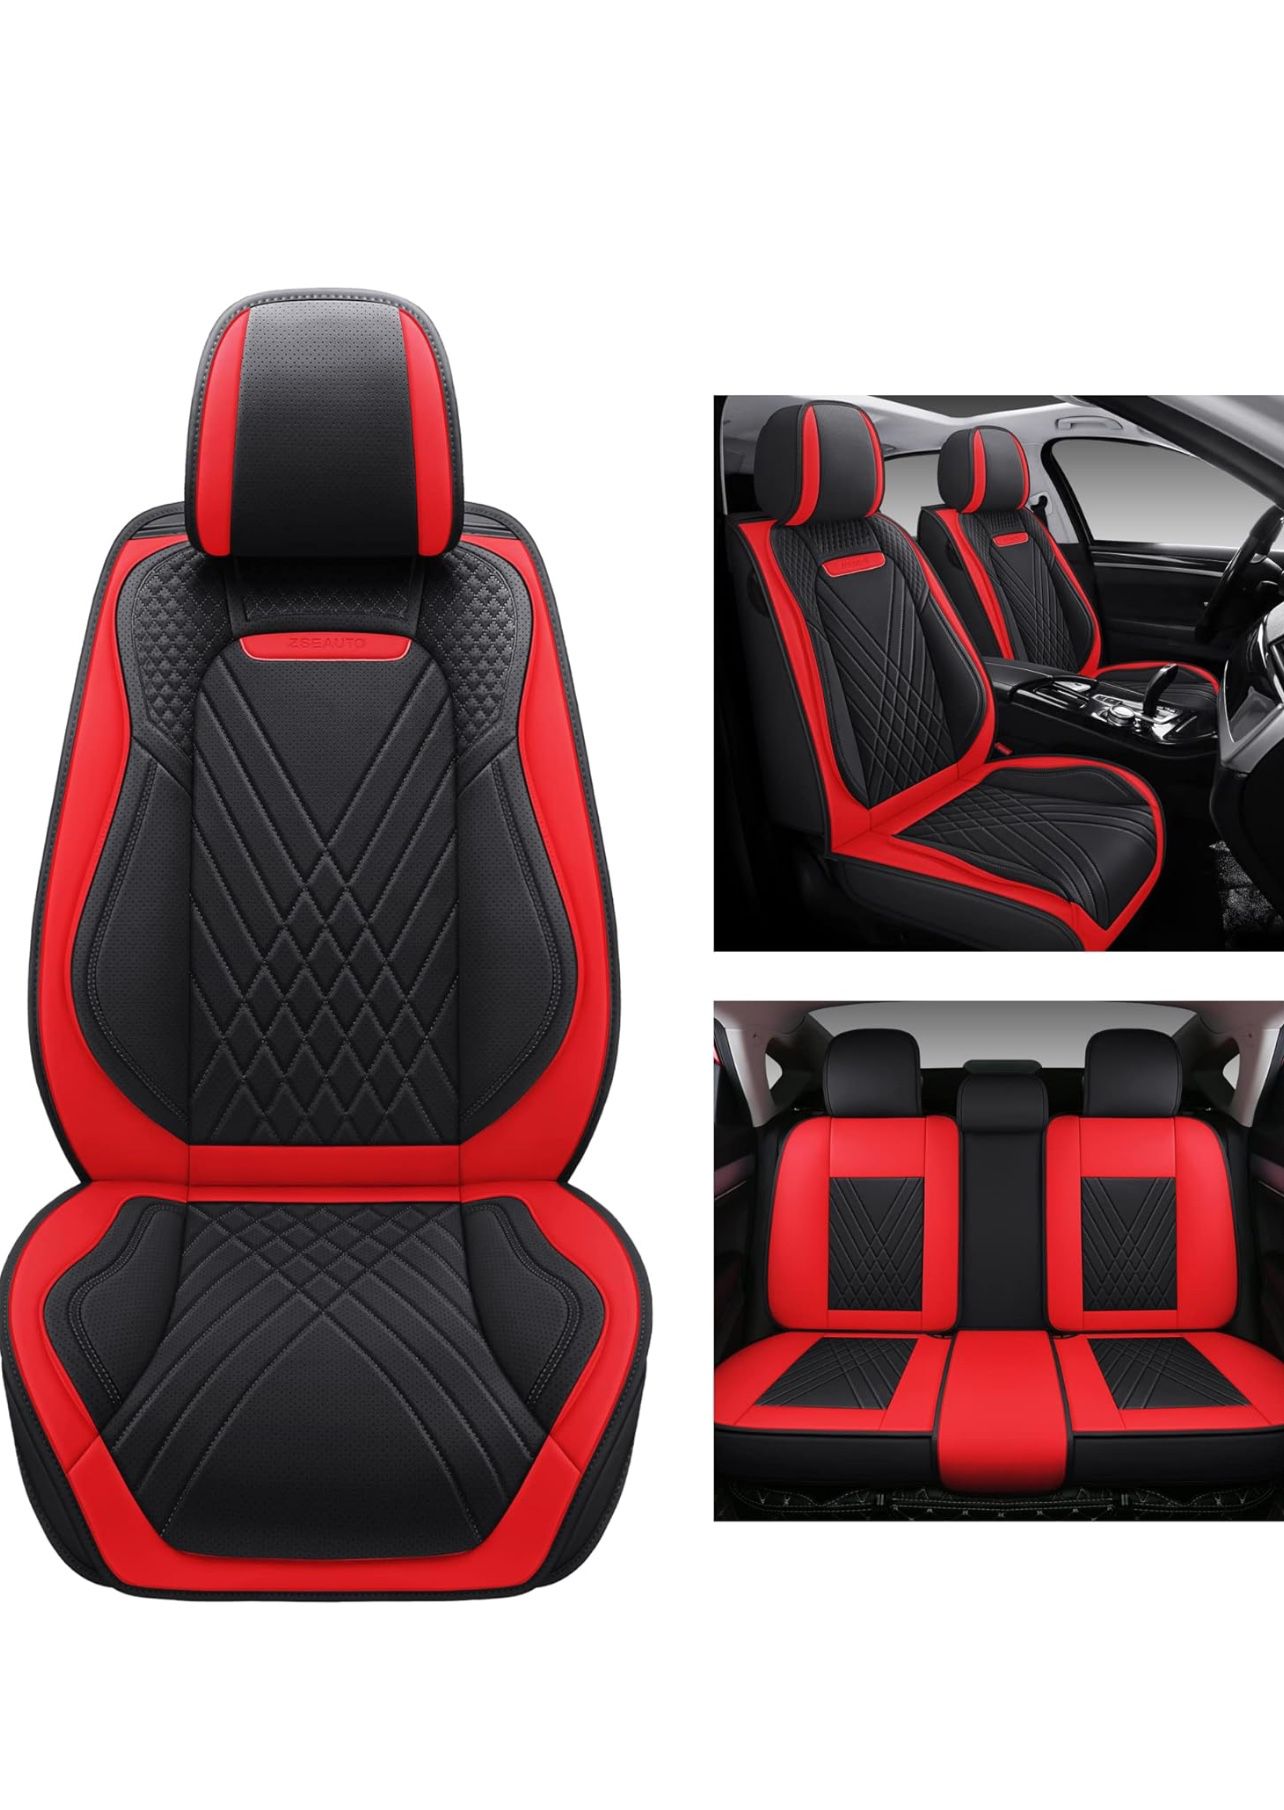 STK Leather Car Seat Covers Full Set Fit for Most Sedan SUV Such As Kia Camry Corolla Nissan Hyundai Honda Chevy with Waterproof Car Seat Cushion (